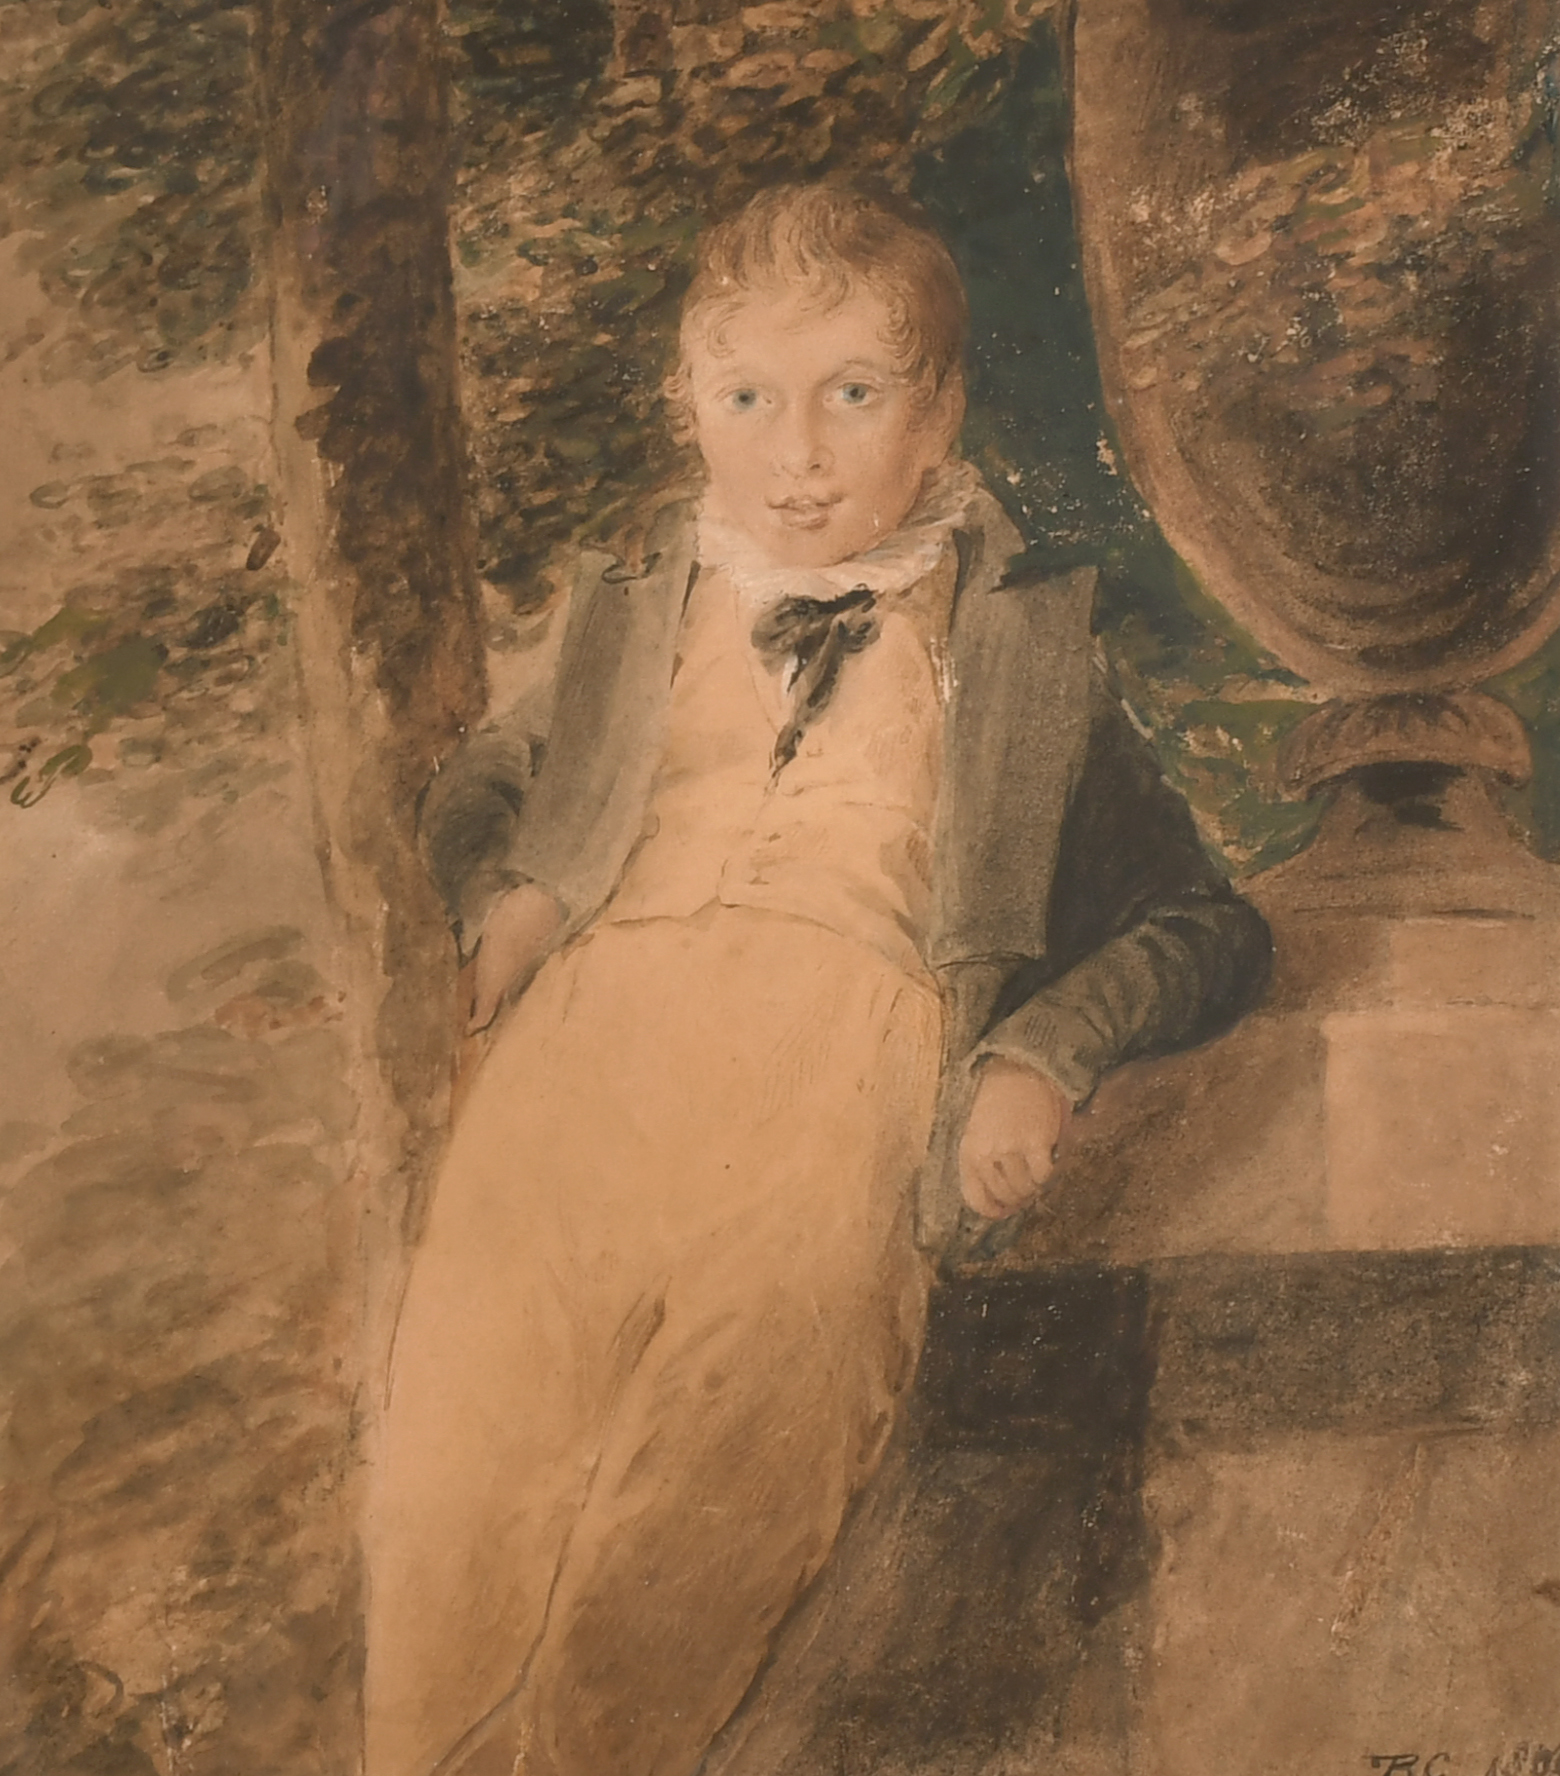 Early 19th Century English School. “Boy Leaning against an Urn”, Watercolour, Signed with